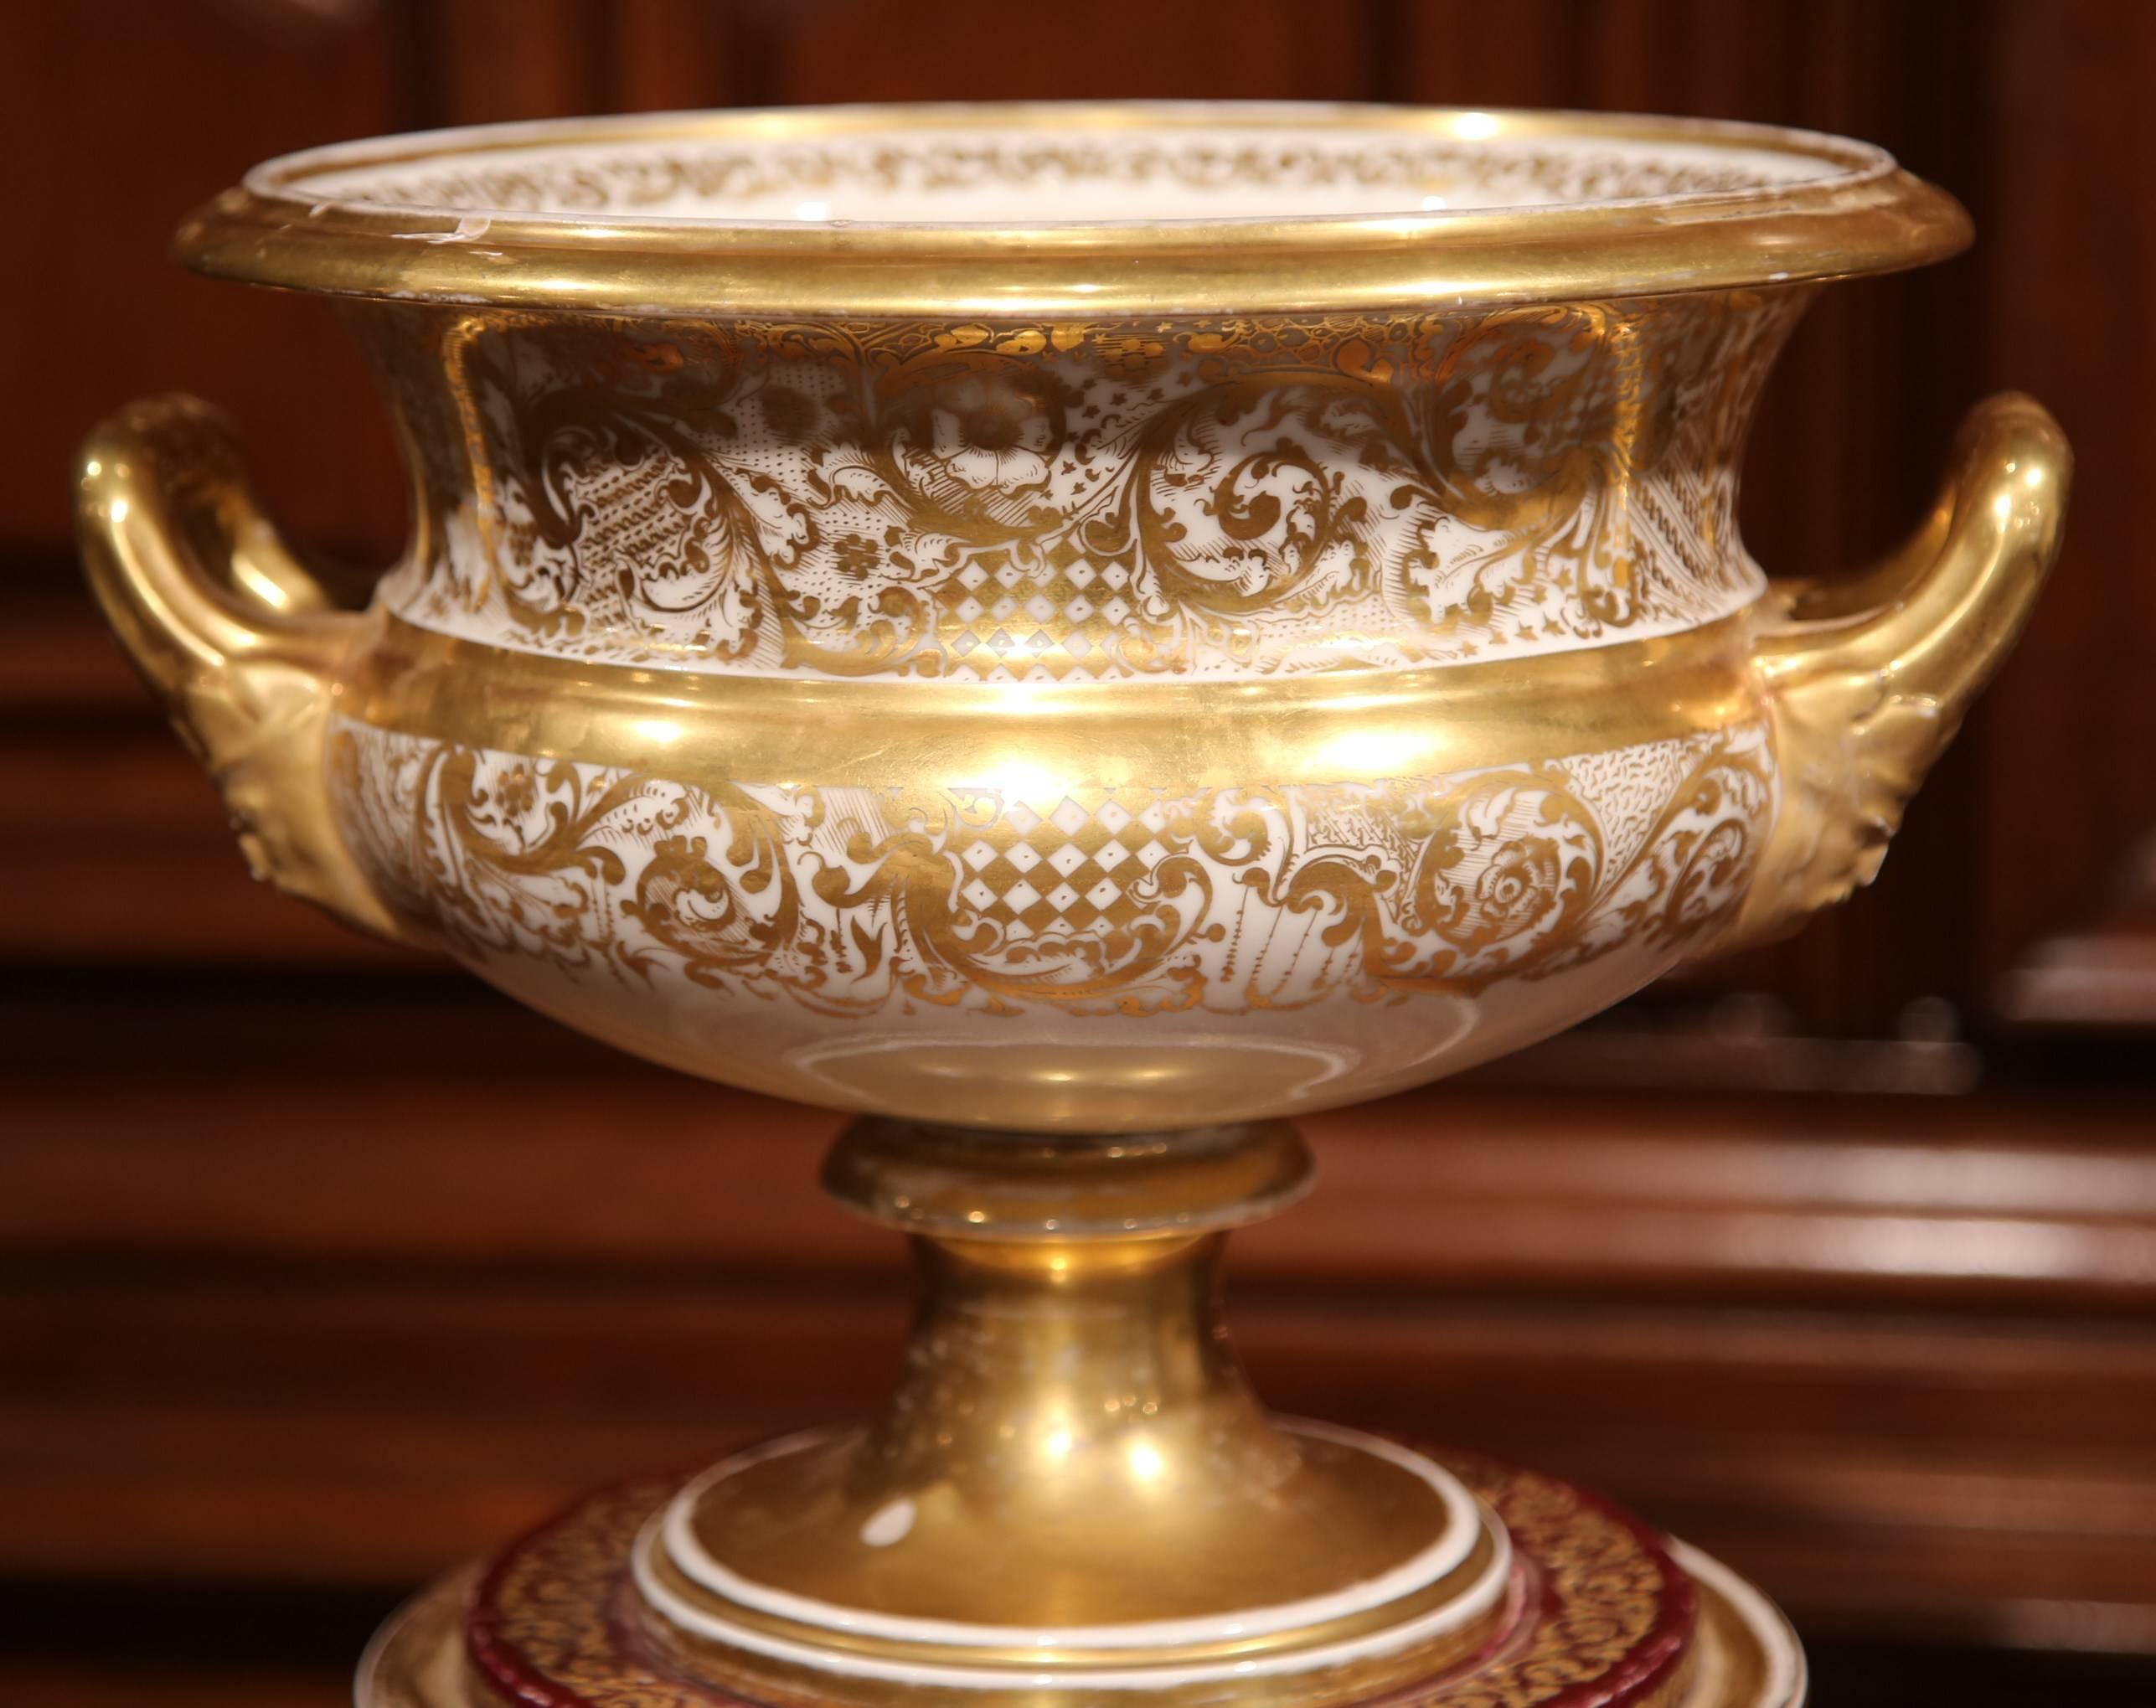 This elegant, antique, hand-painted porcelain cache pot was crafted in Paris, France, circa 1870. The vase has a gilt finish, small handles and a round decorative base with hand-painted fruits, flowers and butterfly motifs. The unique urn is in